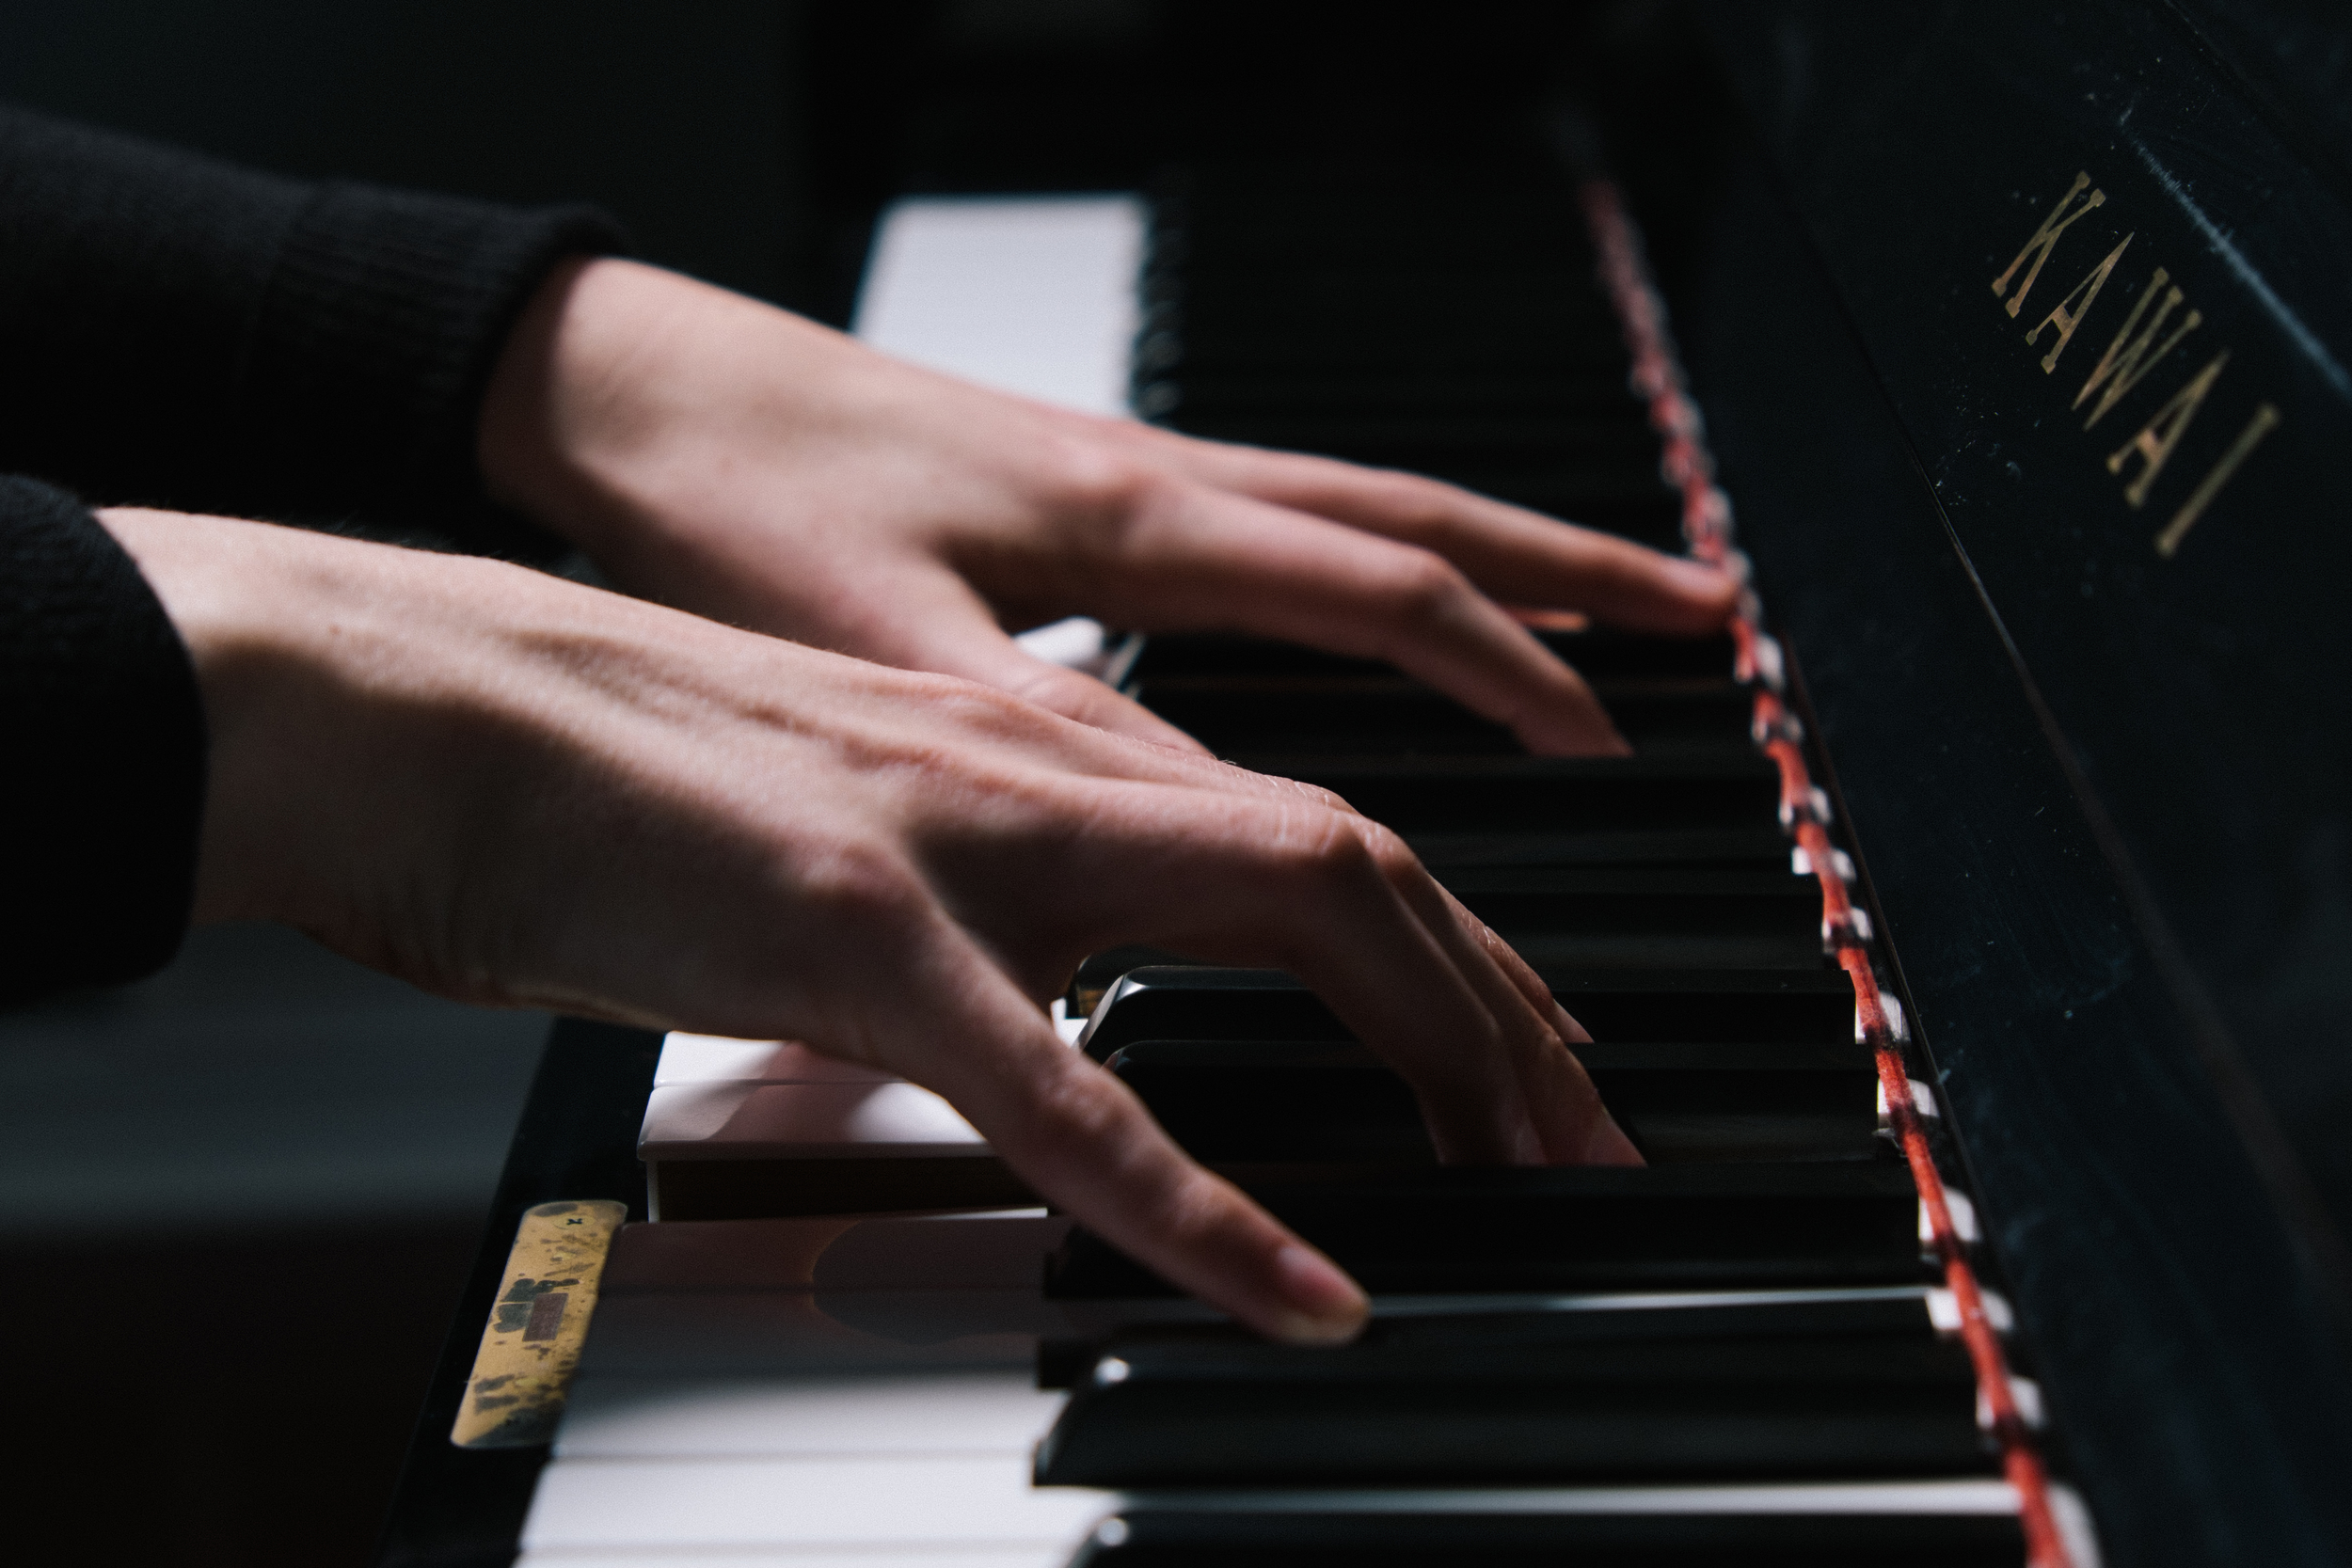   Piano Lessons &nbsp;by Amy Valyear,&nbsp;BMus, MYCC, RMT.   Contact     